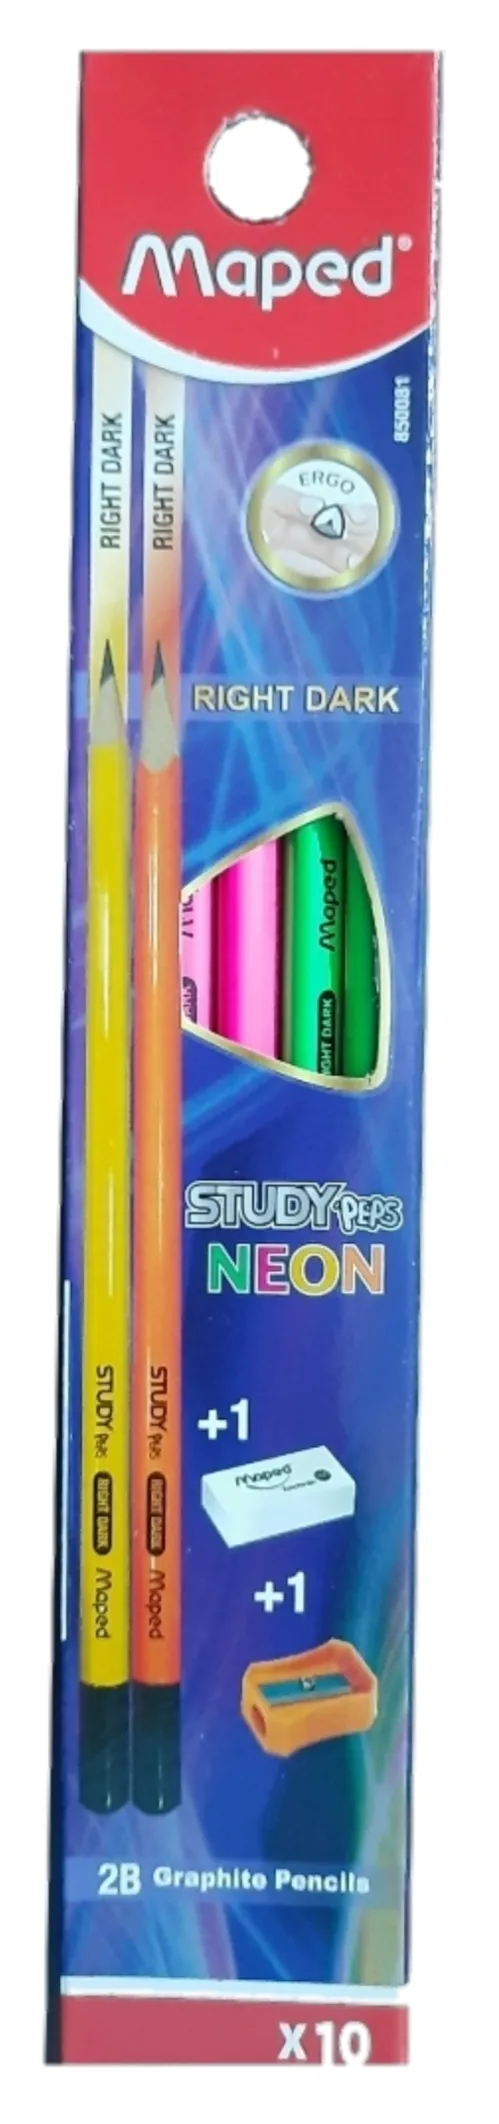 Maped Study Peps NEON Right Dark Pack of 10 Pencils with 1 Free Eraser & Sharpner